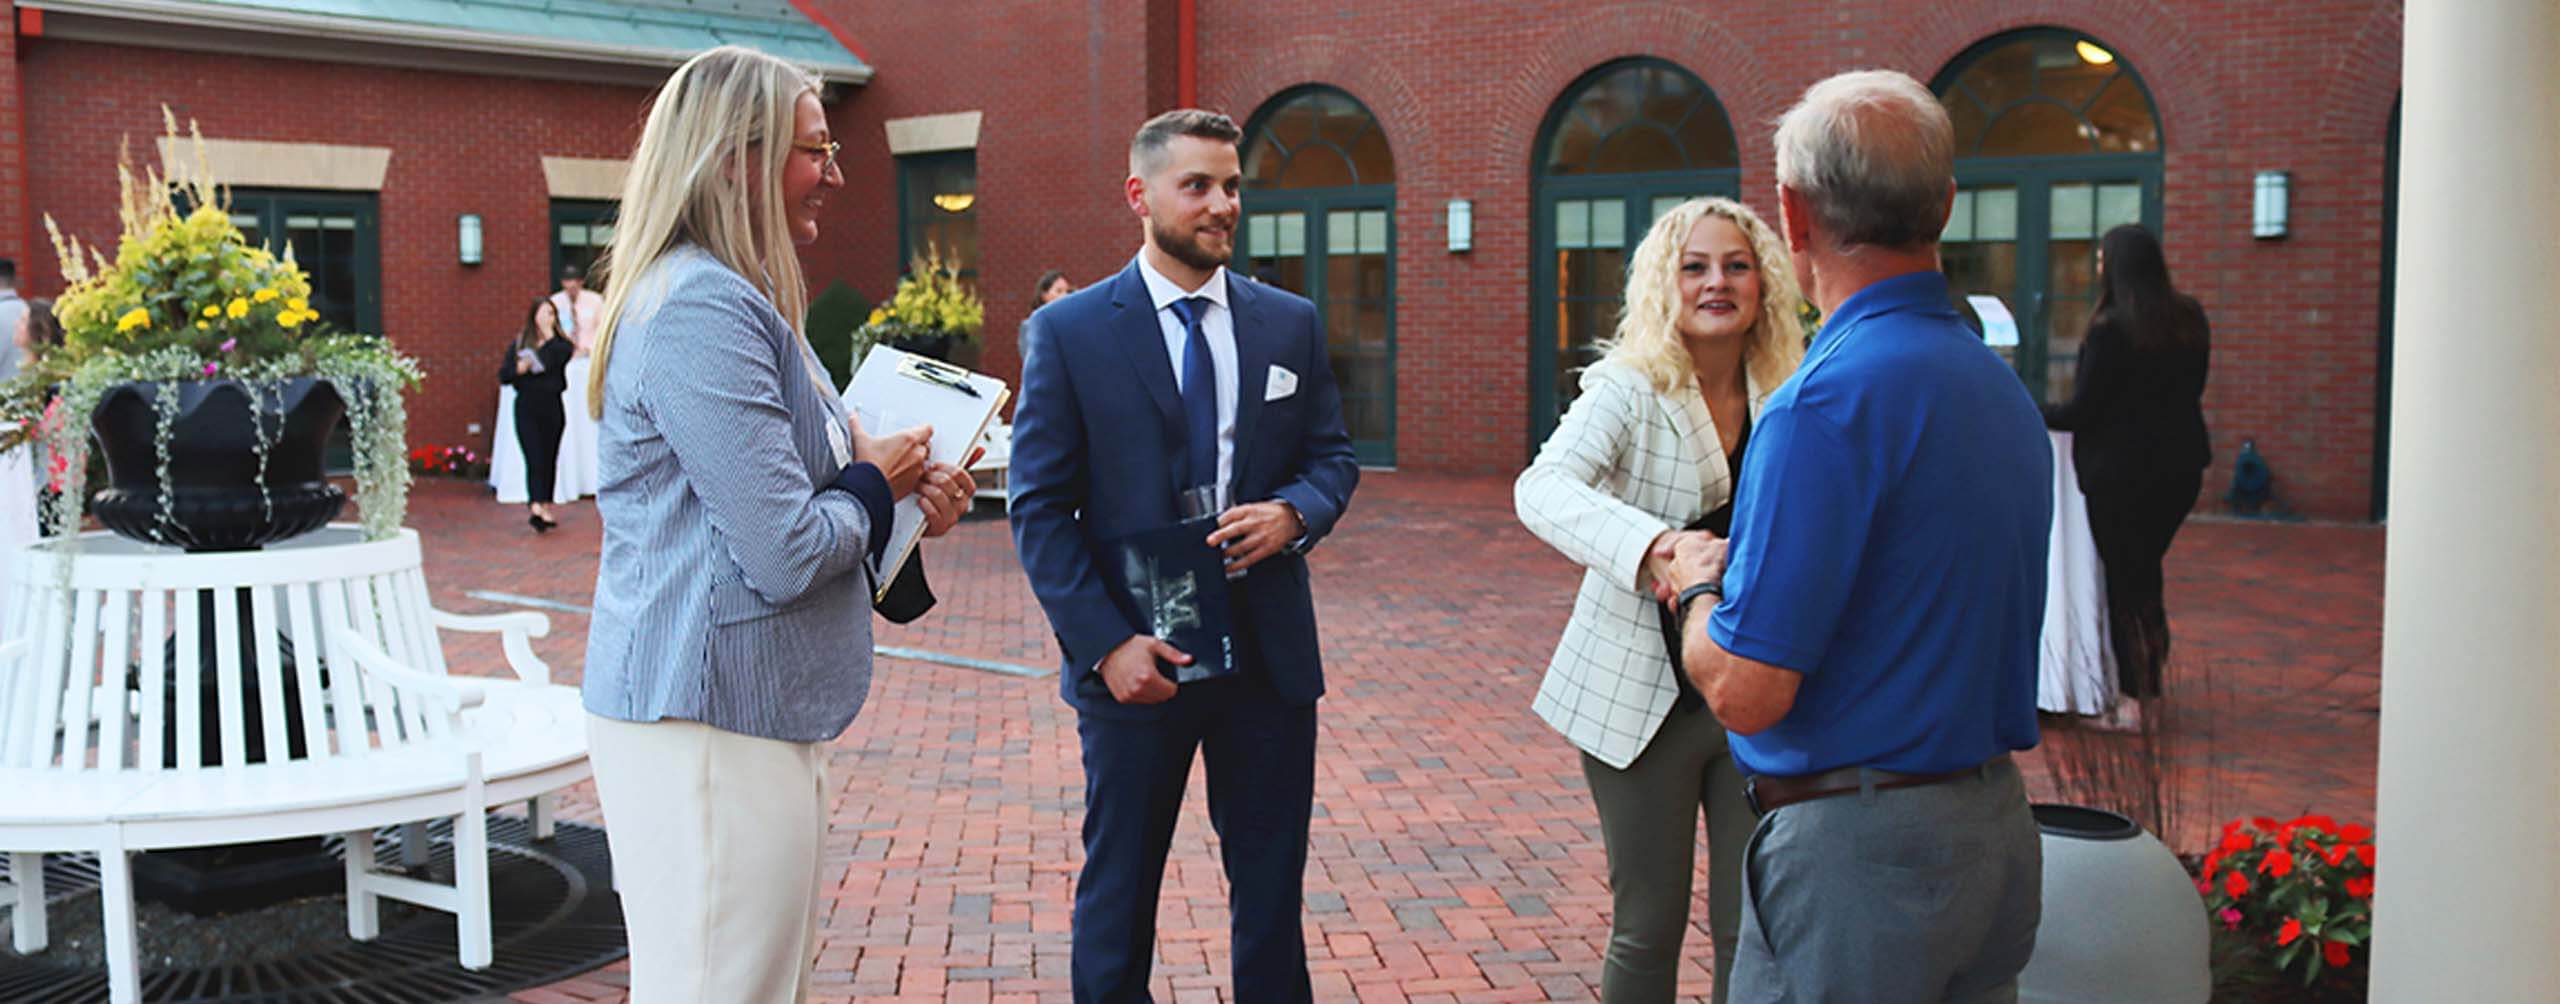 A photo of people standing in a brick courtyard wearing business apparel